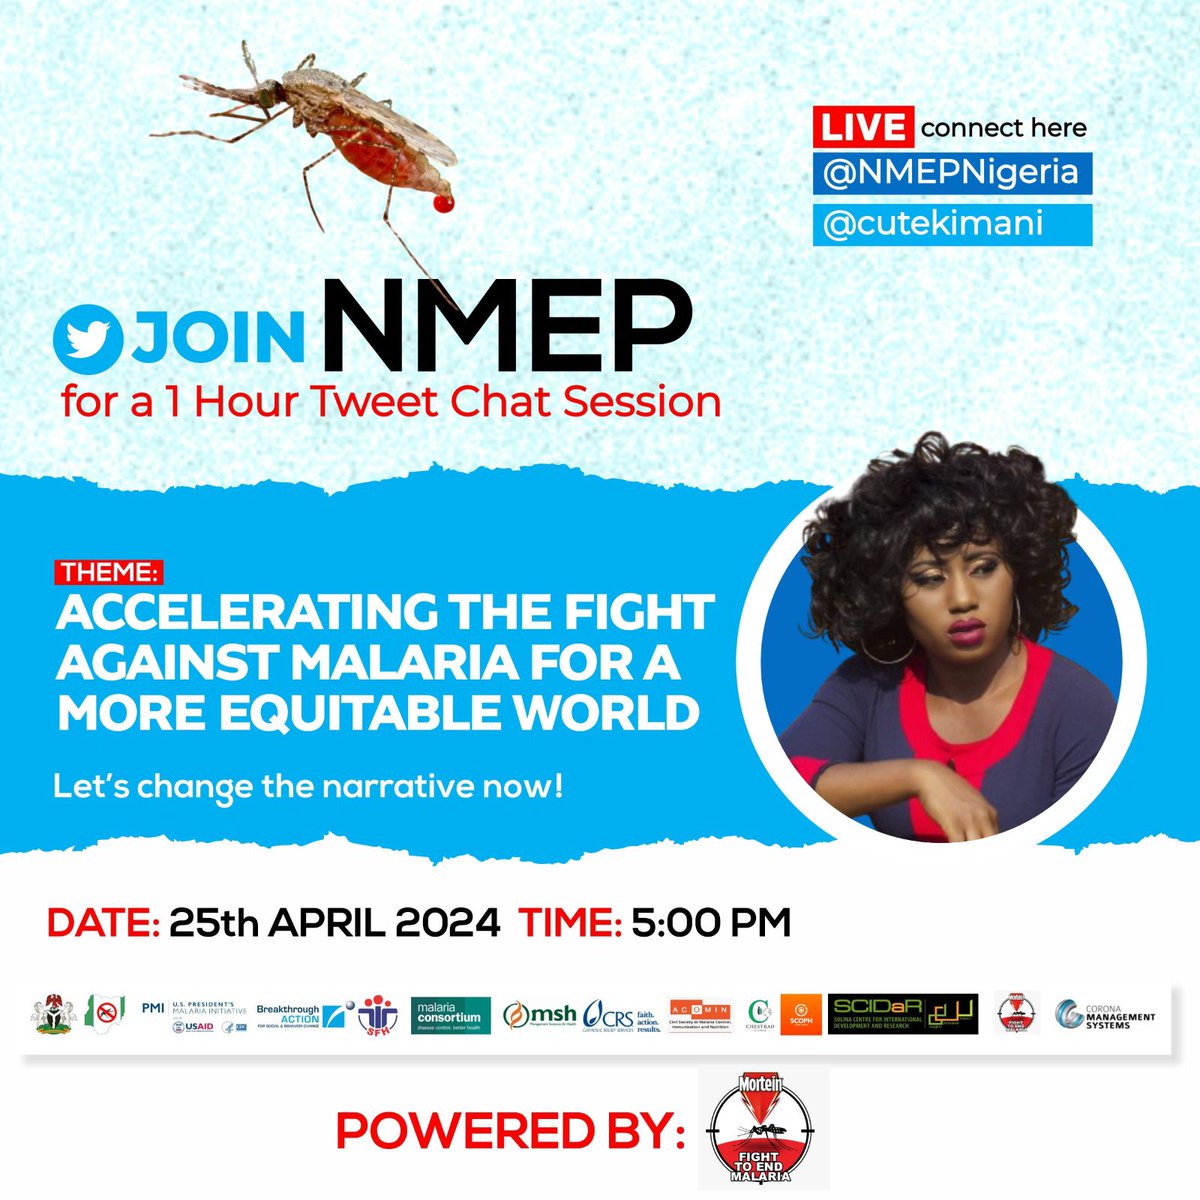 Its happening live today
A TweetChat session with @Cutekimani and @NMEPNigeria and they will be discussing 'ACCELERATING THE FIGGT AGAINST MALARIA FOR A MORE EQUITABLE WORLD'

Don't miss it

Time: 5 Pm 
Date: 25th, April 2024
#2024WMD 
#ZeroMalariaStartsWithMe
#KimaniOffAir